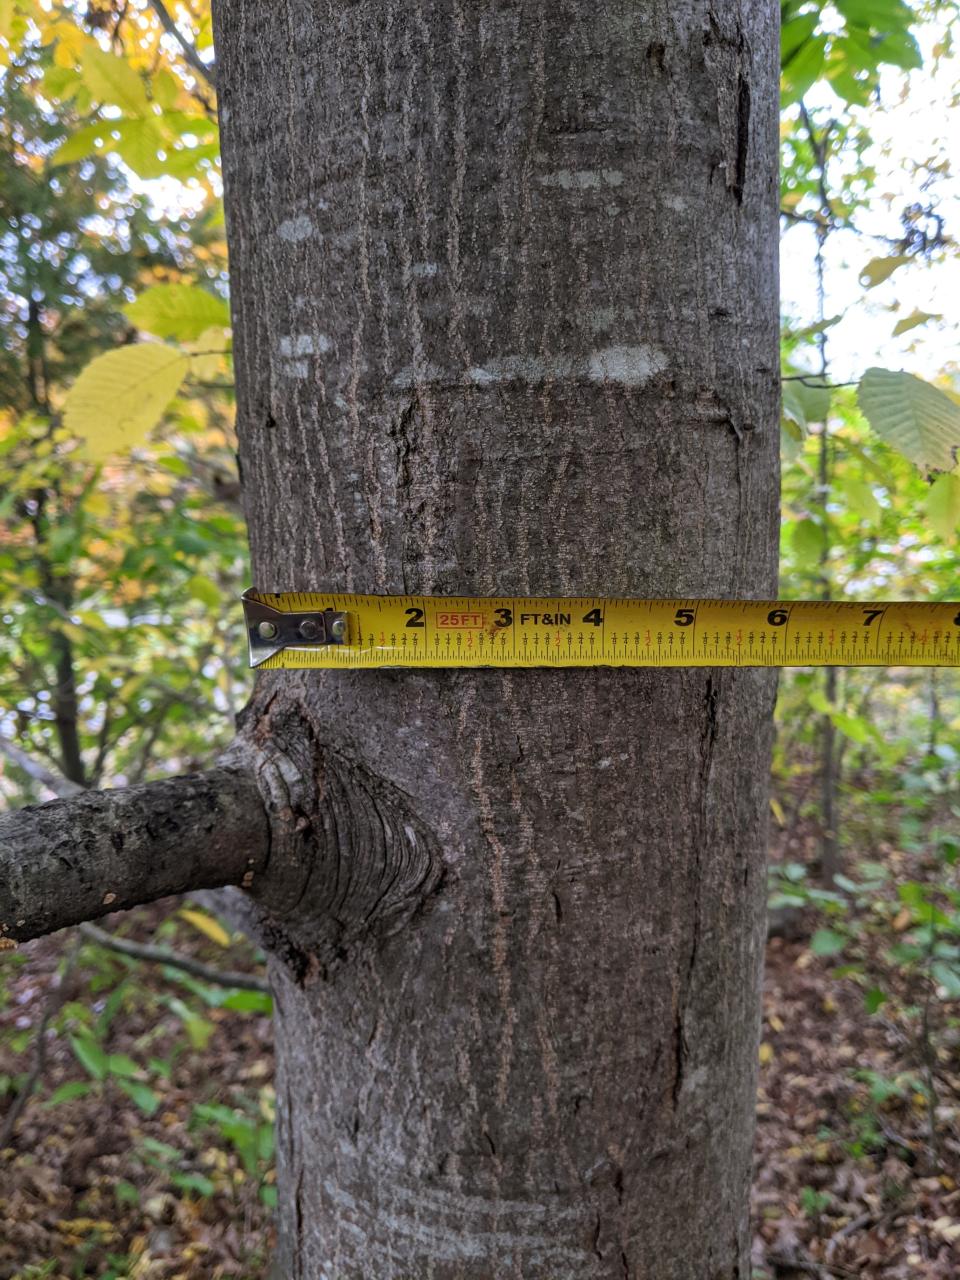 Checking the diameter of a tree is essential to evaluating its growth.